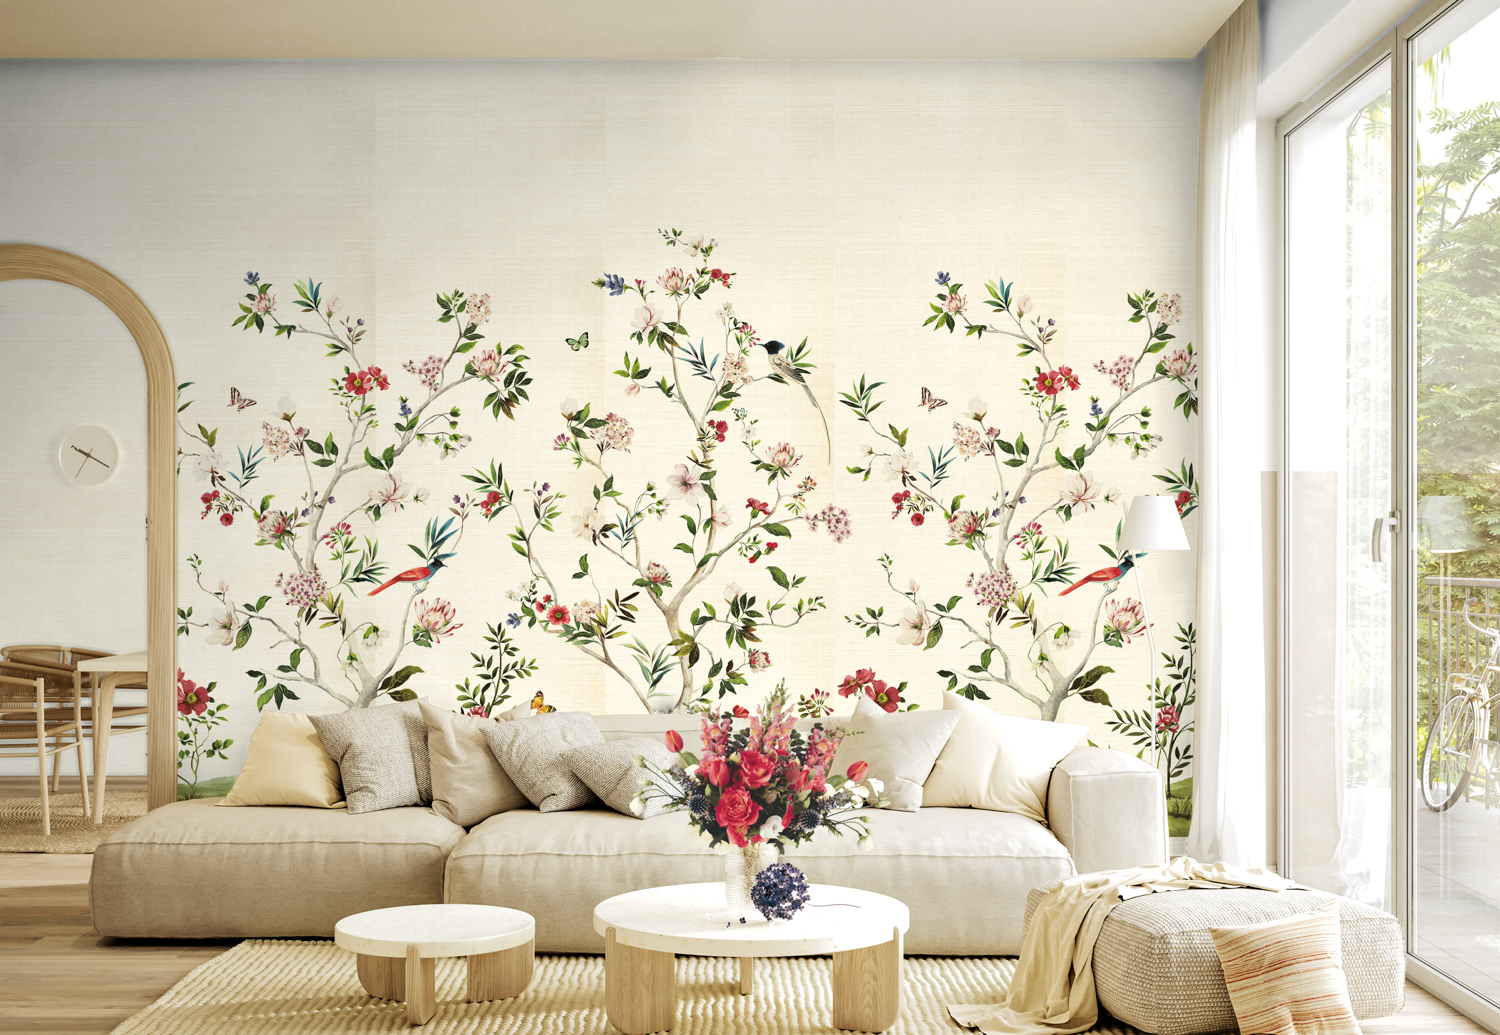 Full wall-to-wall floral wallpaper in a living space with a low-profile cream sofa and round coffee tables